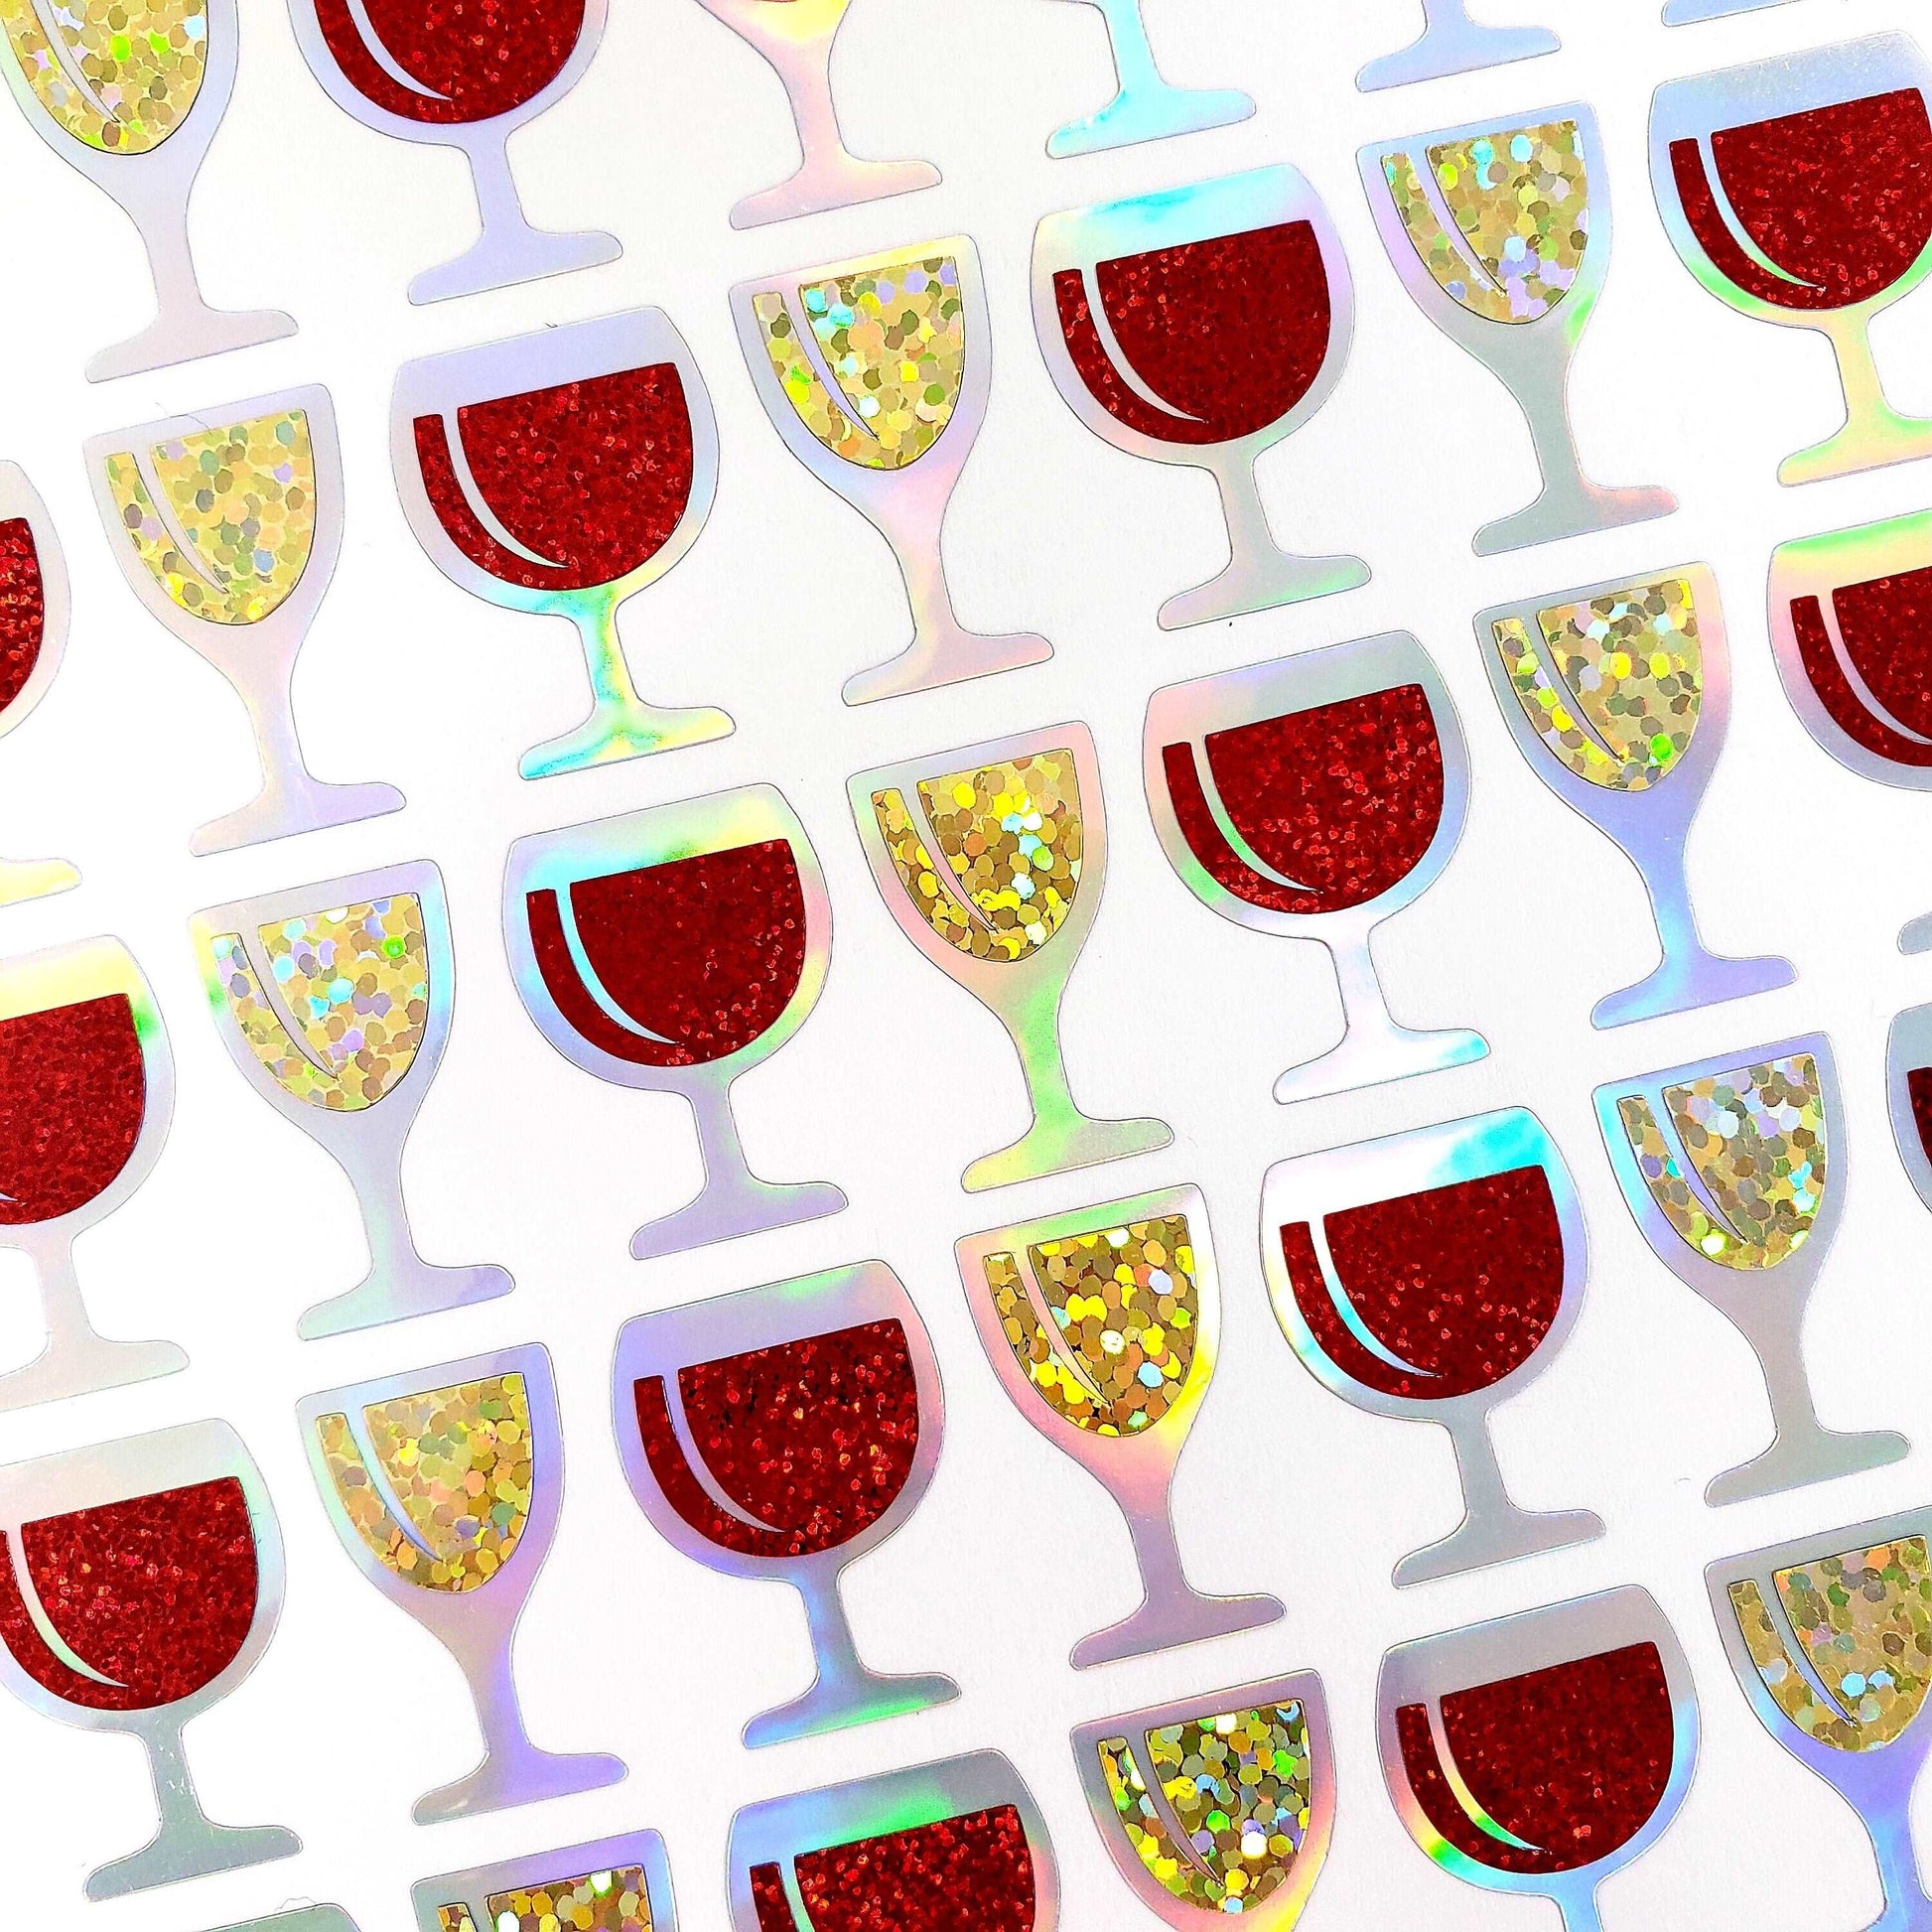 Small Wine Glass Stickers, set of 49 red and white wine glitter stickers for invitations, new year's eve, wedding drink choice and book club